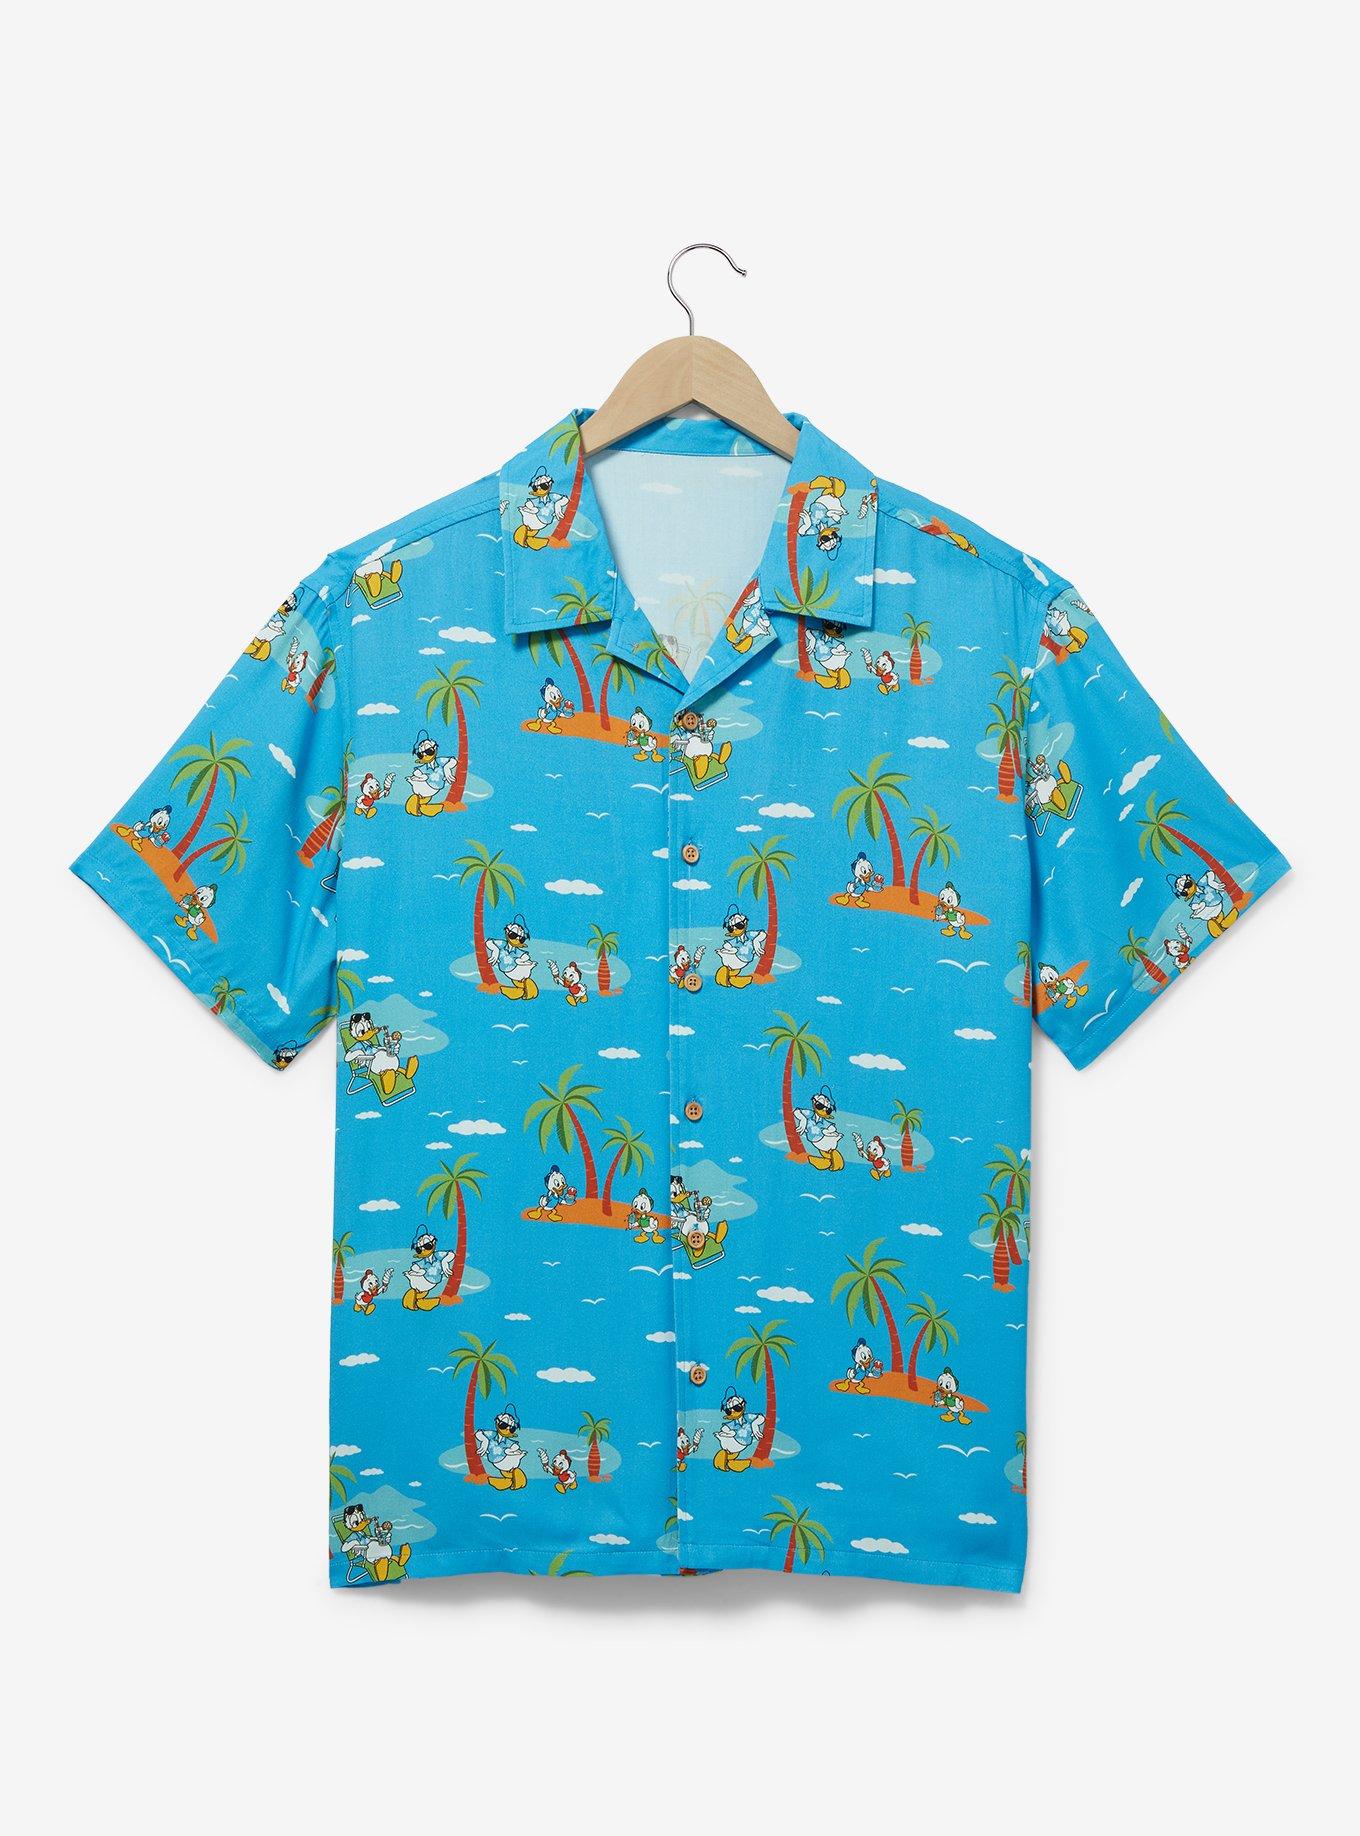 Disney Donald Duck Island Allover Print Button-Up Top - BoxLunch Exclusive, BLUE, hi-res